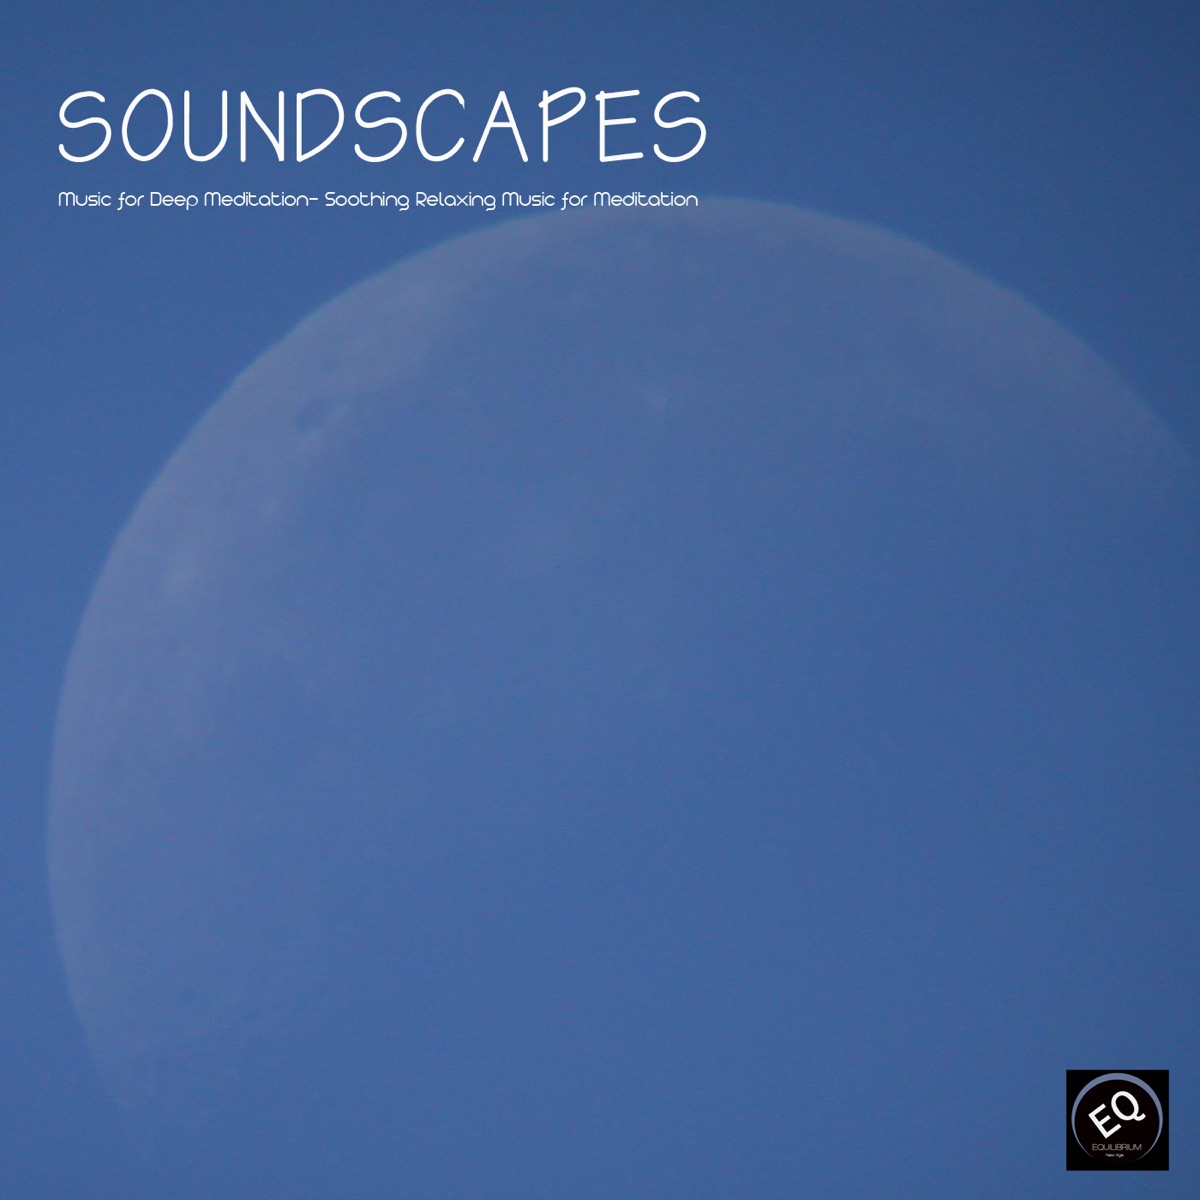 Tranquil Music Sound of Nature - Soundscapes - Music for Deep Meditation. Soothing Relaxing Music with Nature Sounds for Relaxation and Meditation